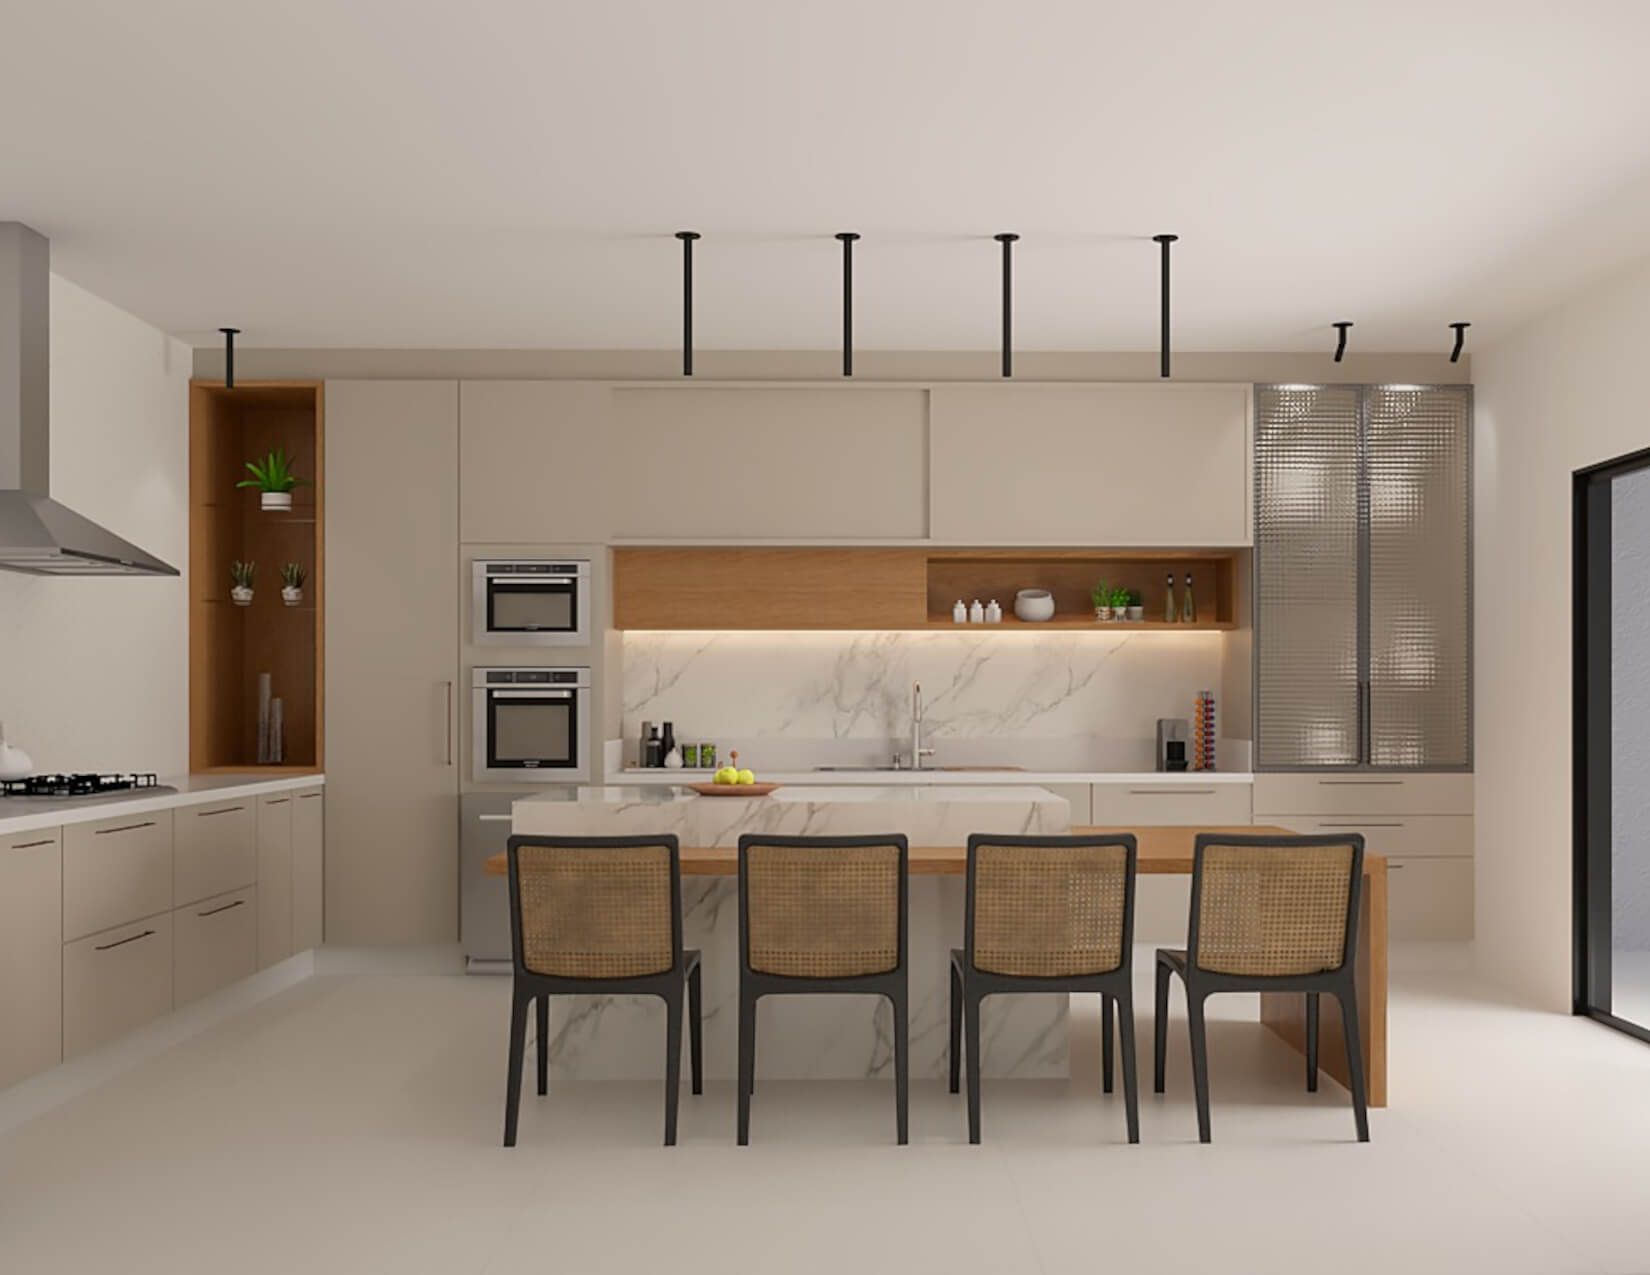 A clean, beige kitchen with overhead lighting